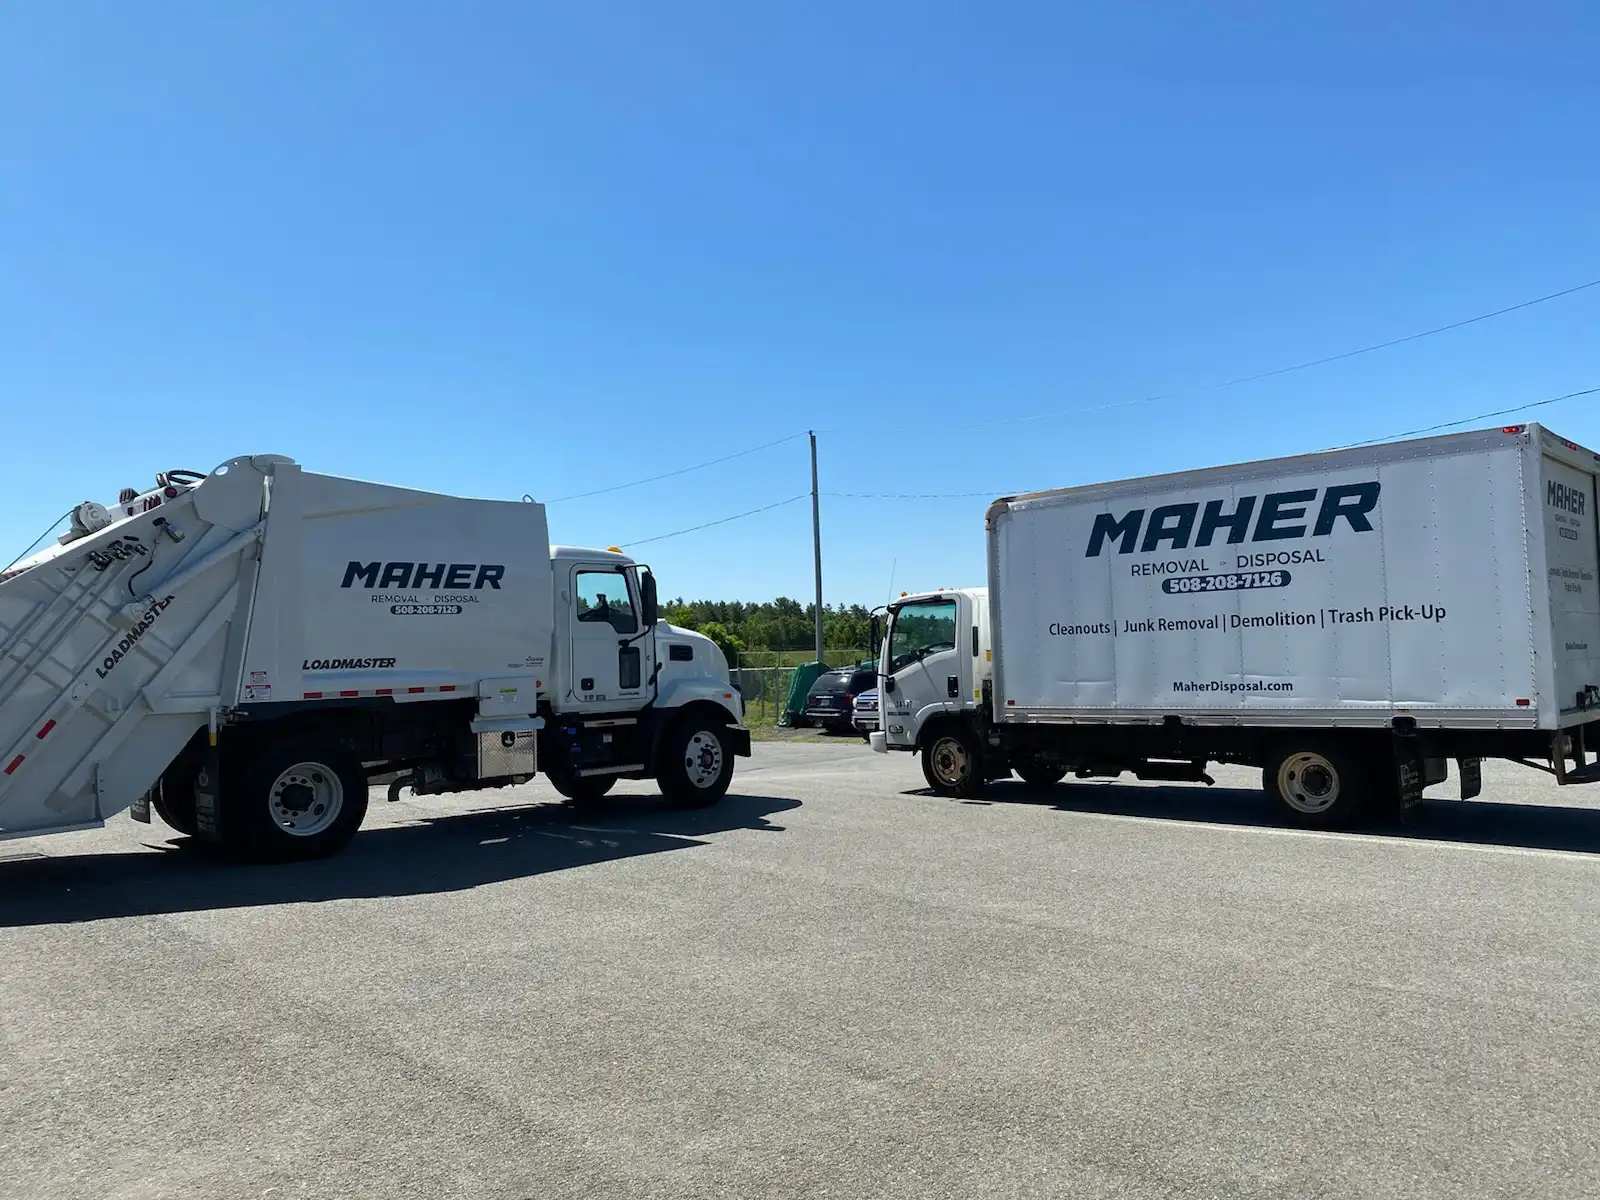 Maher Removal & Disposal is a Trash Pickup & Junk Removal company in Swansea, MA